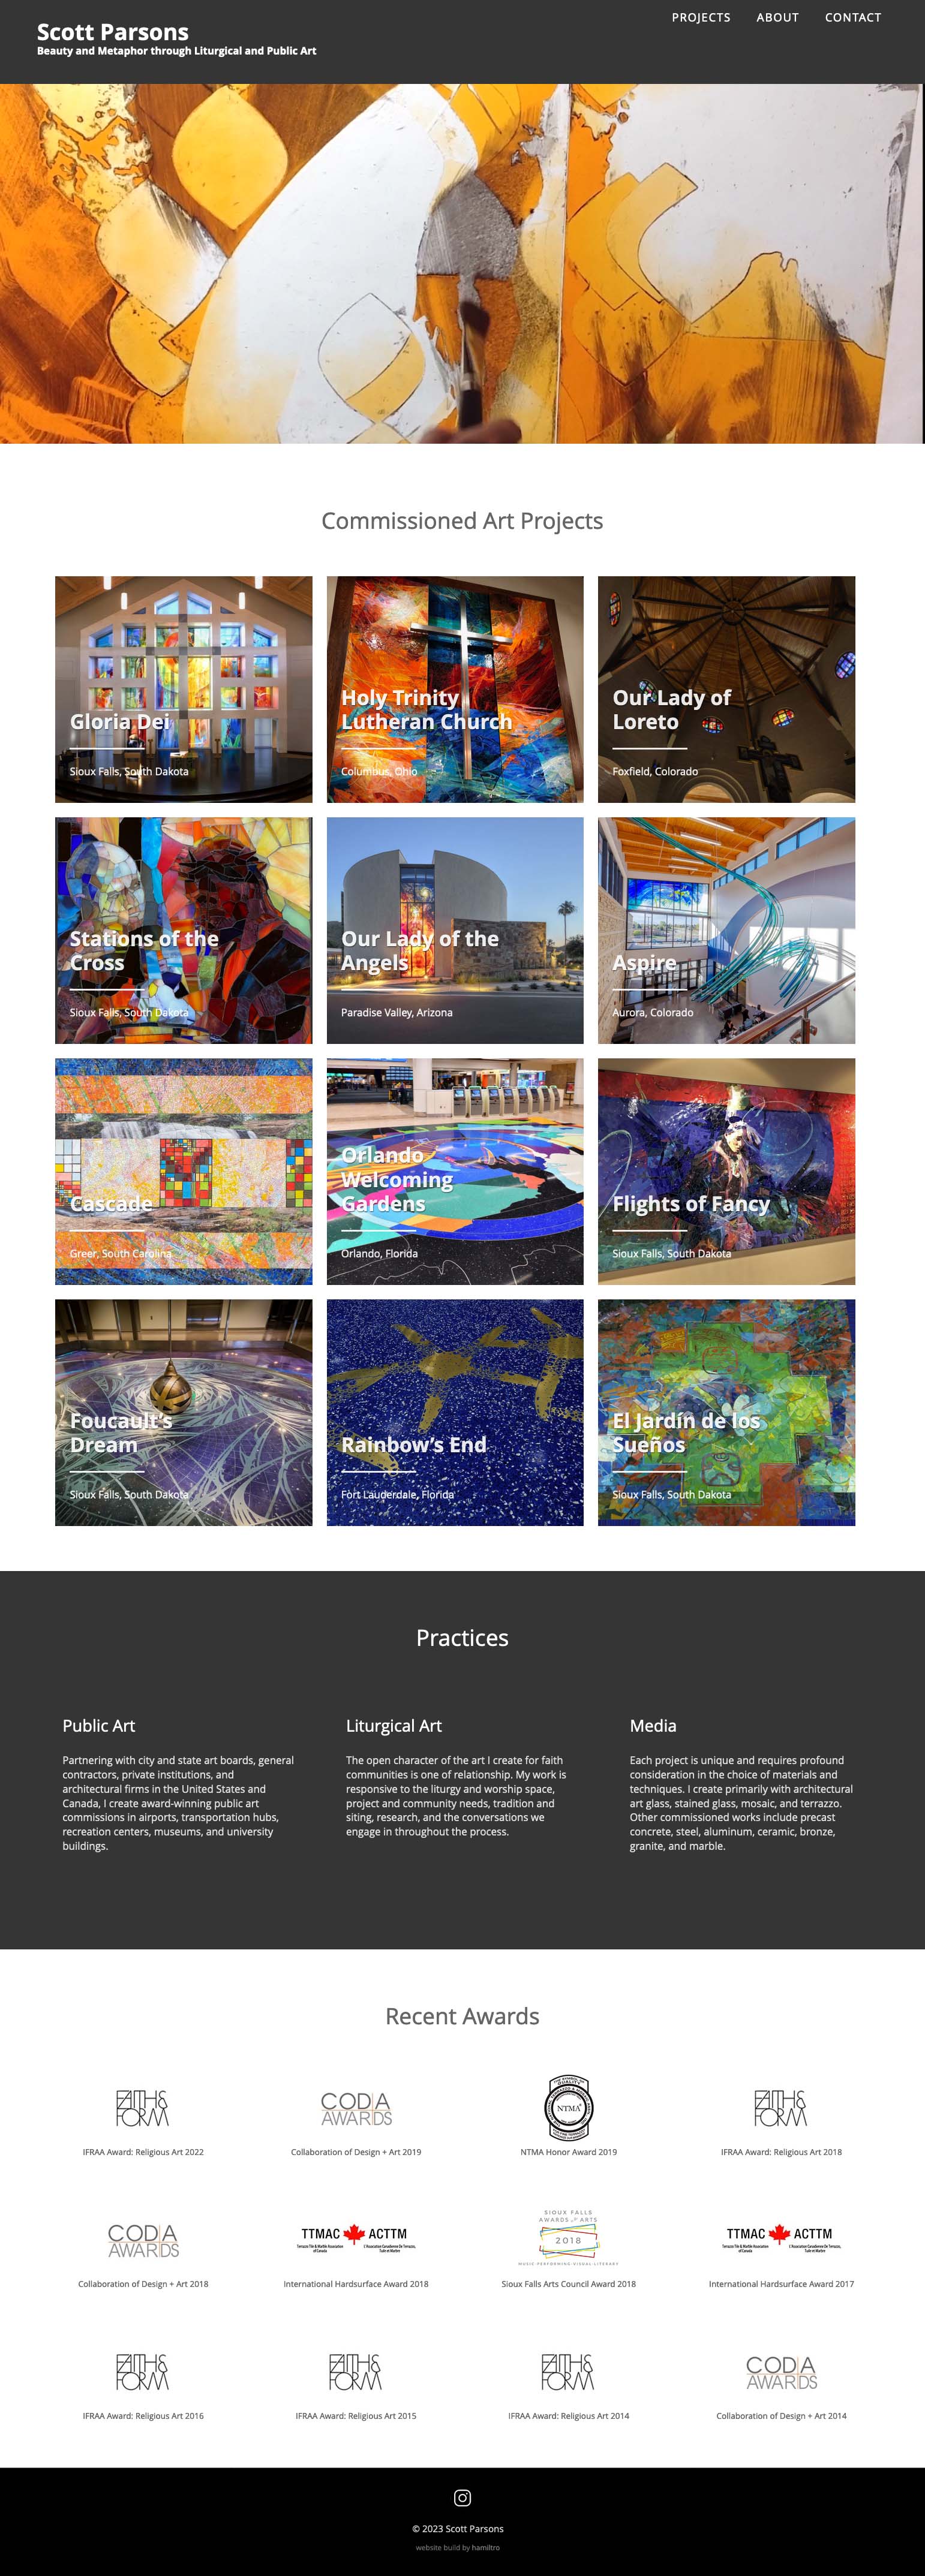 website design for architects-designers - Website design for an artist who creates large public and liturgical works of art. The website includes a banner video showing the work process.																																												 - long-scrolling page with rich visual sections to help a user find what they are looking for.